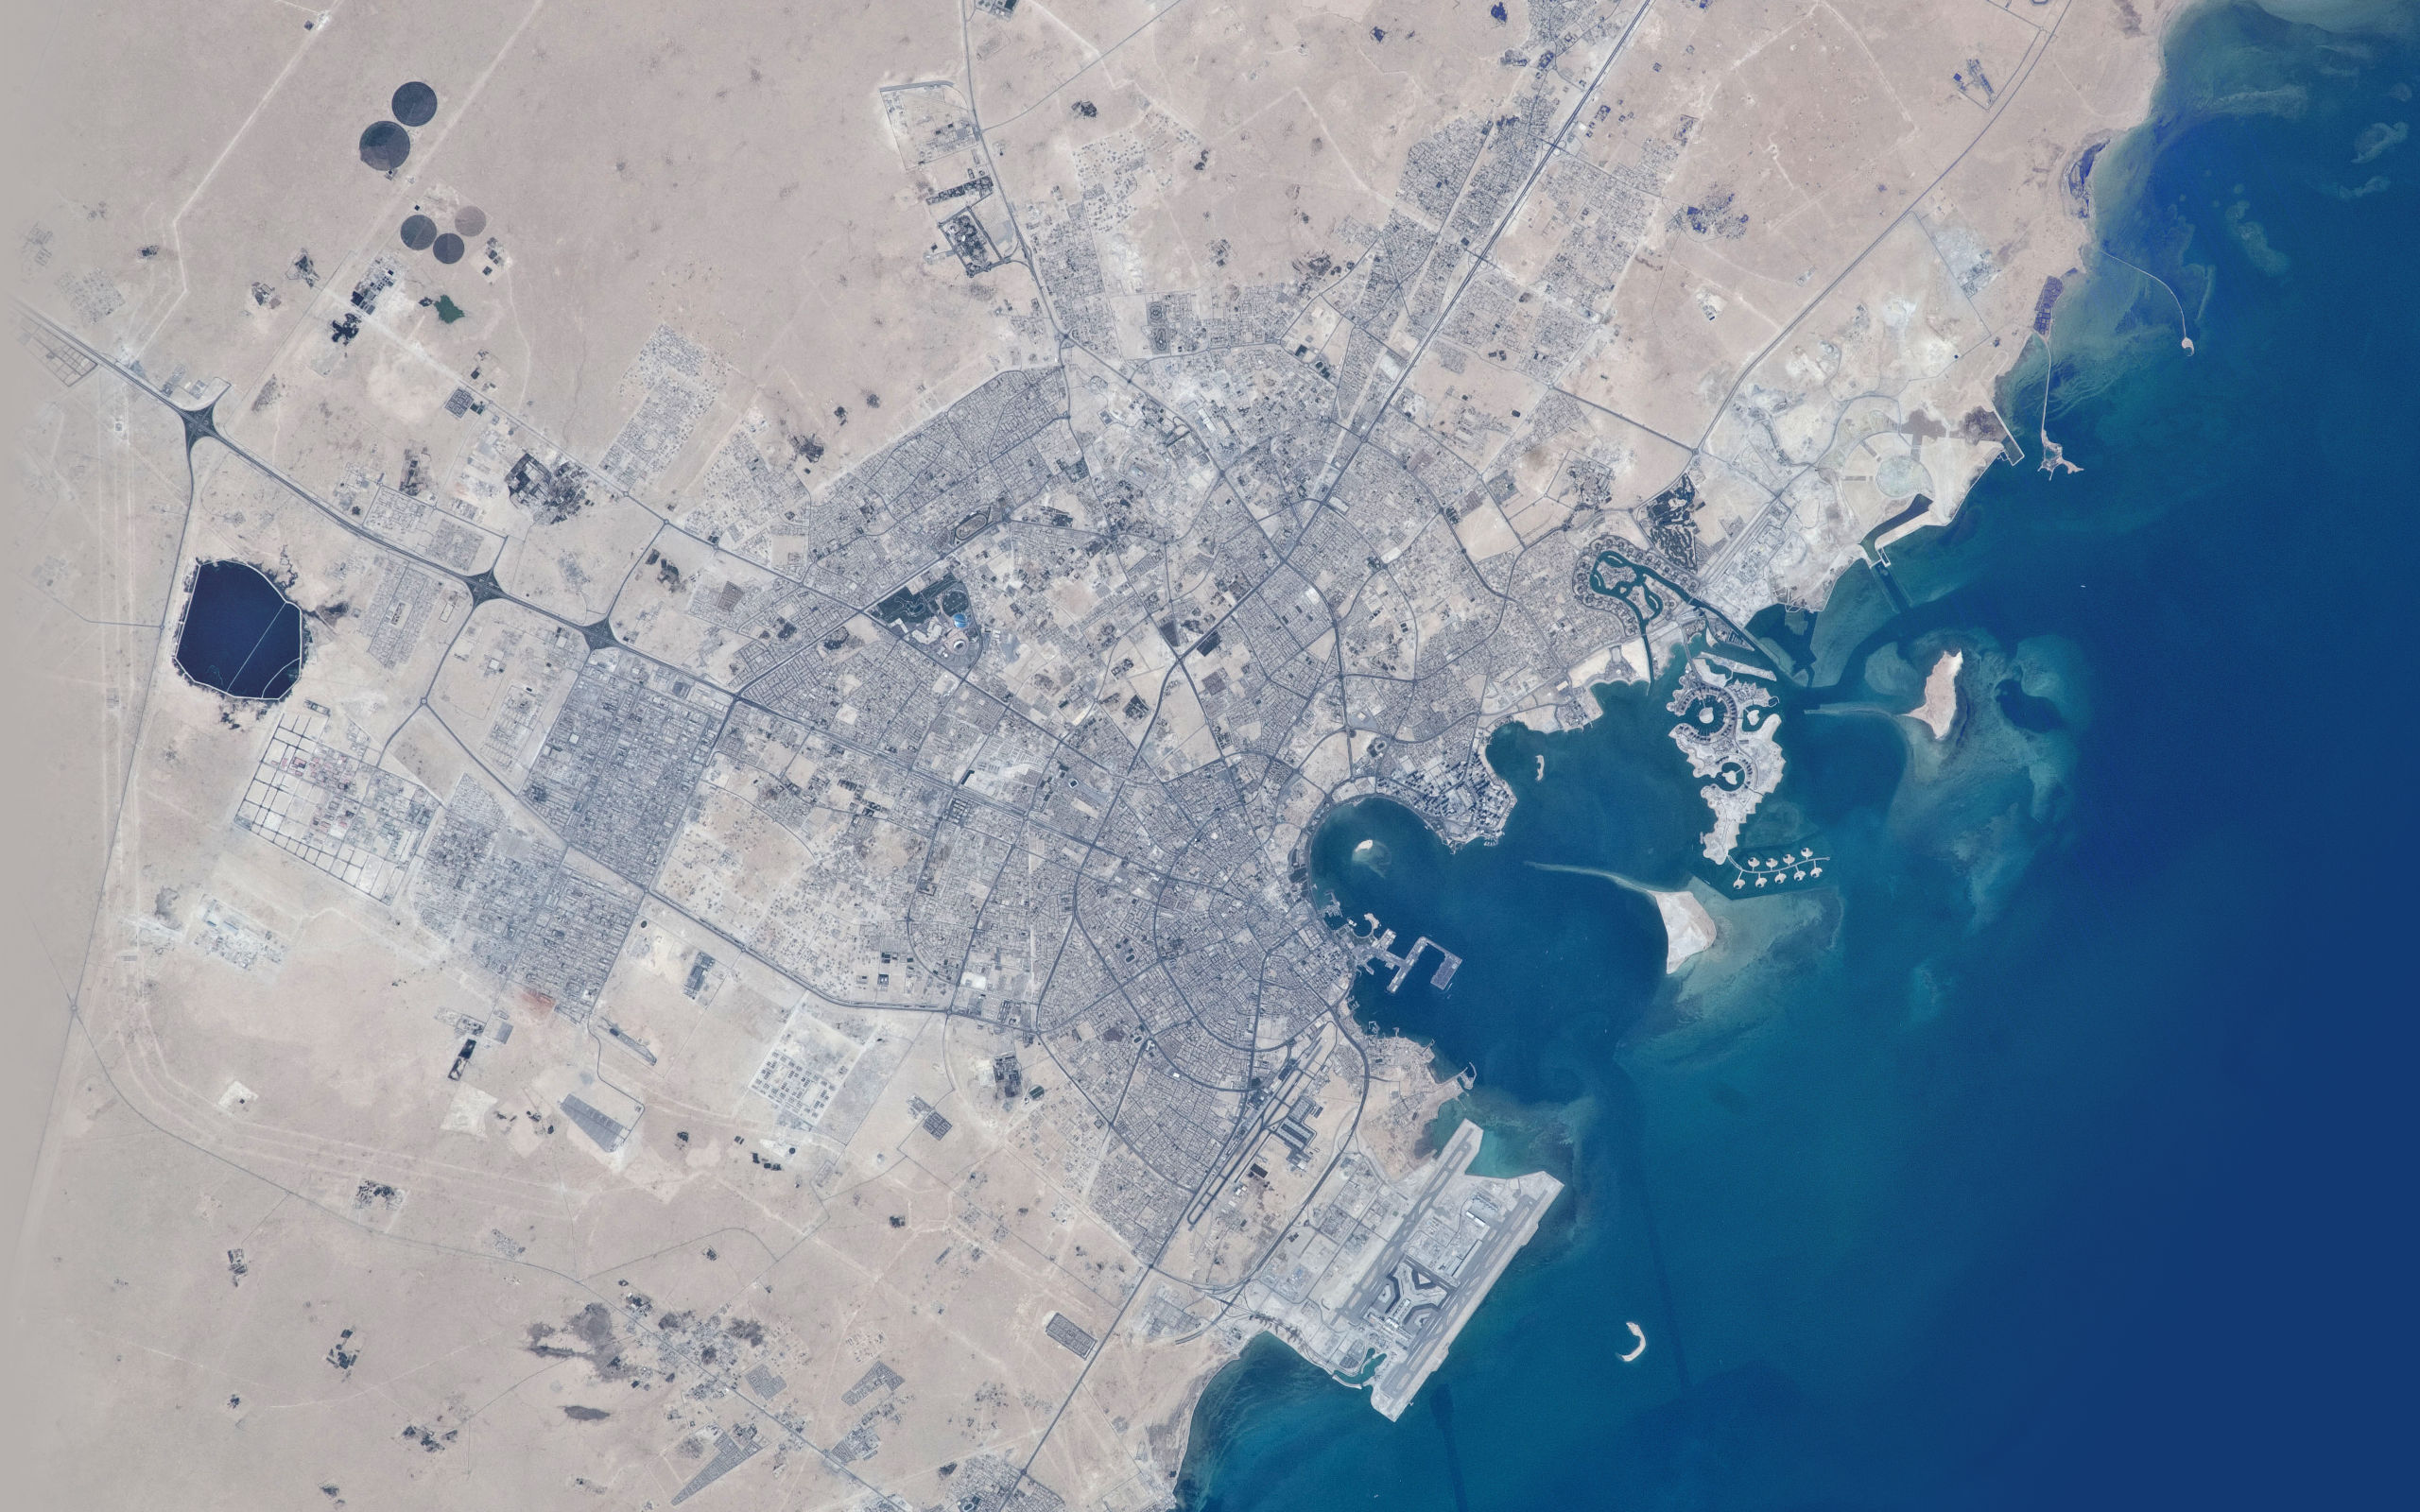 General 2560x1600 satellite imagery aerial view coastline cityscape sea gray infrastructure blue